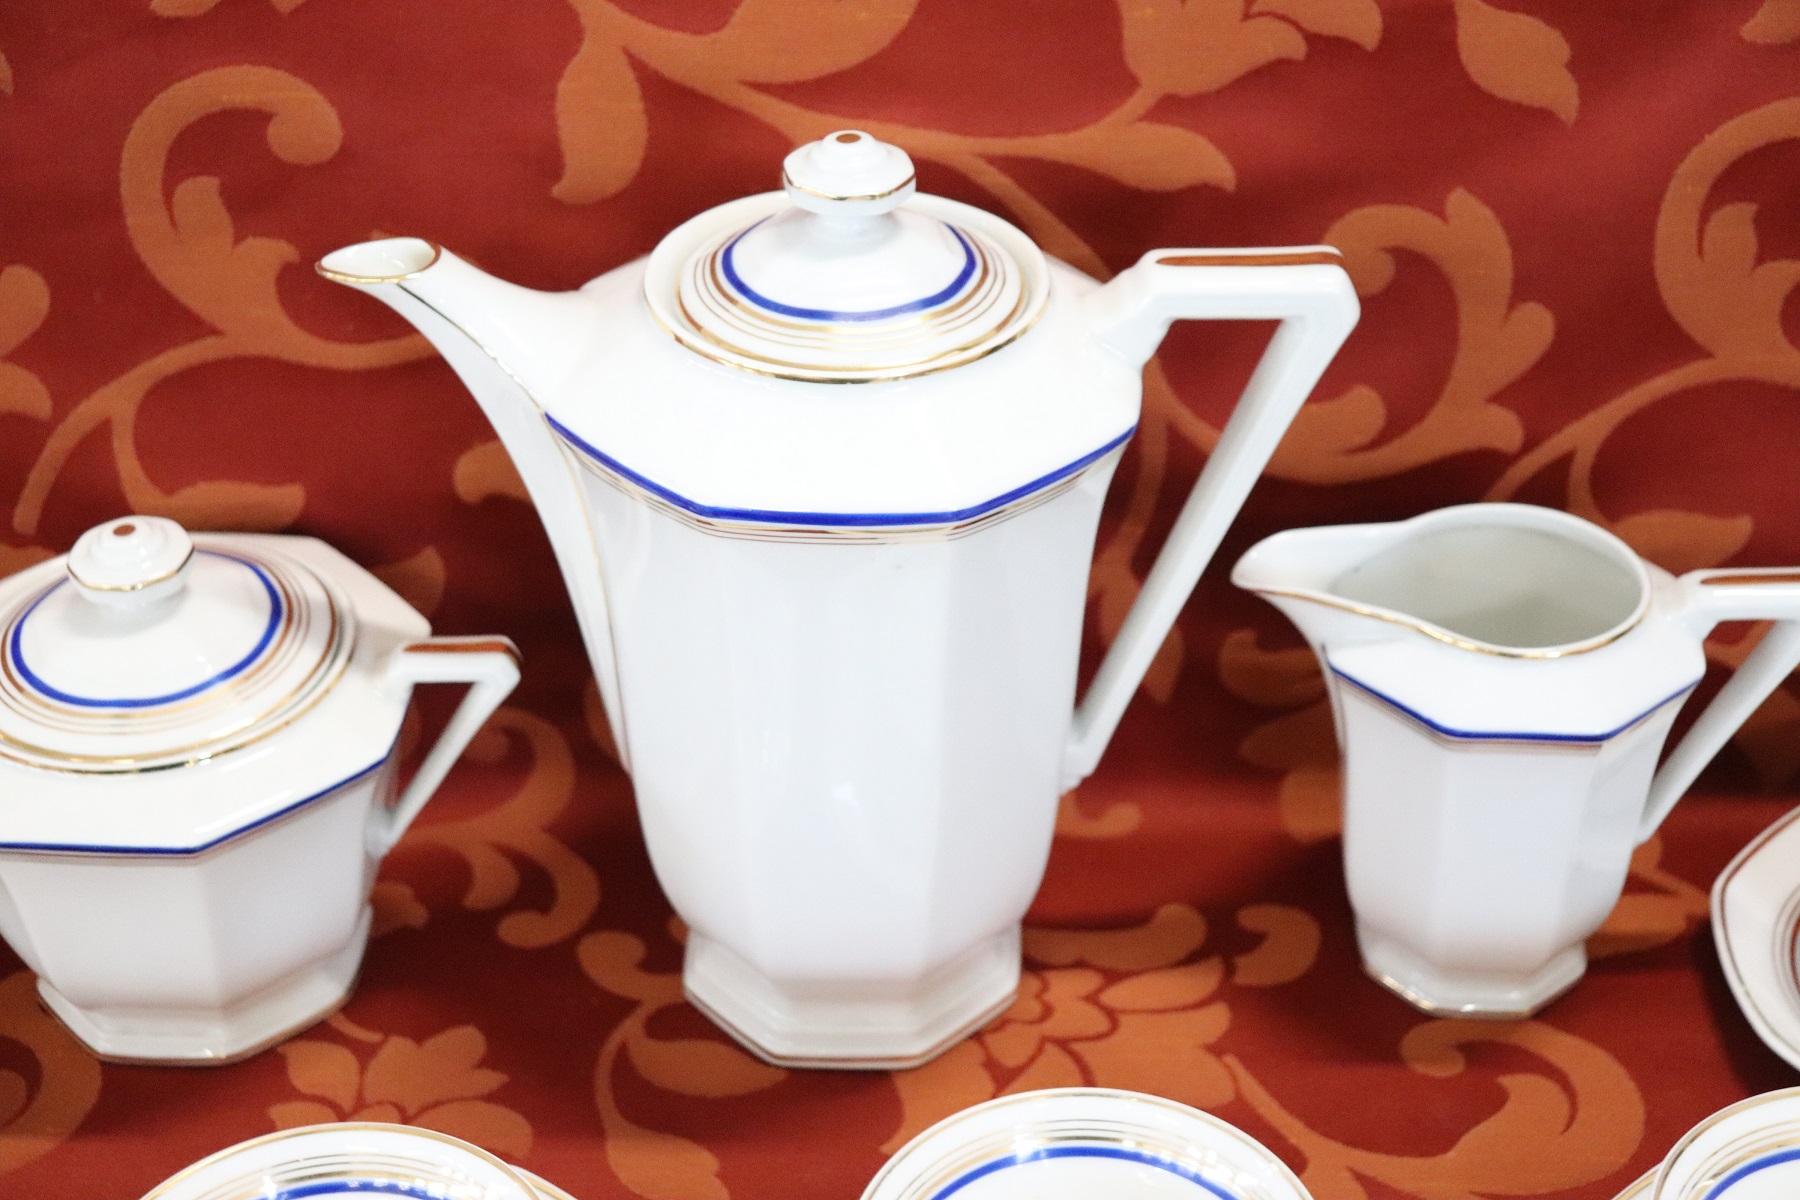 Hand-Painted French Hand Painted and Gold Porcelain Tea or Coffee Set by Limoges 15 Pieces